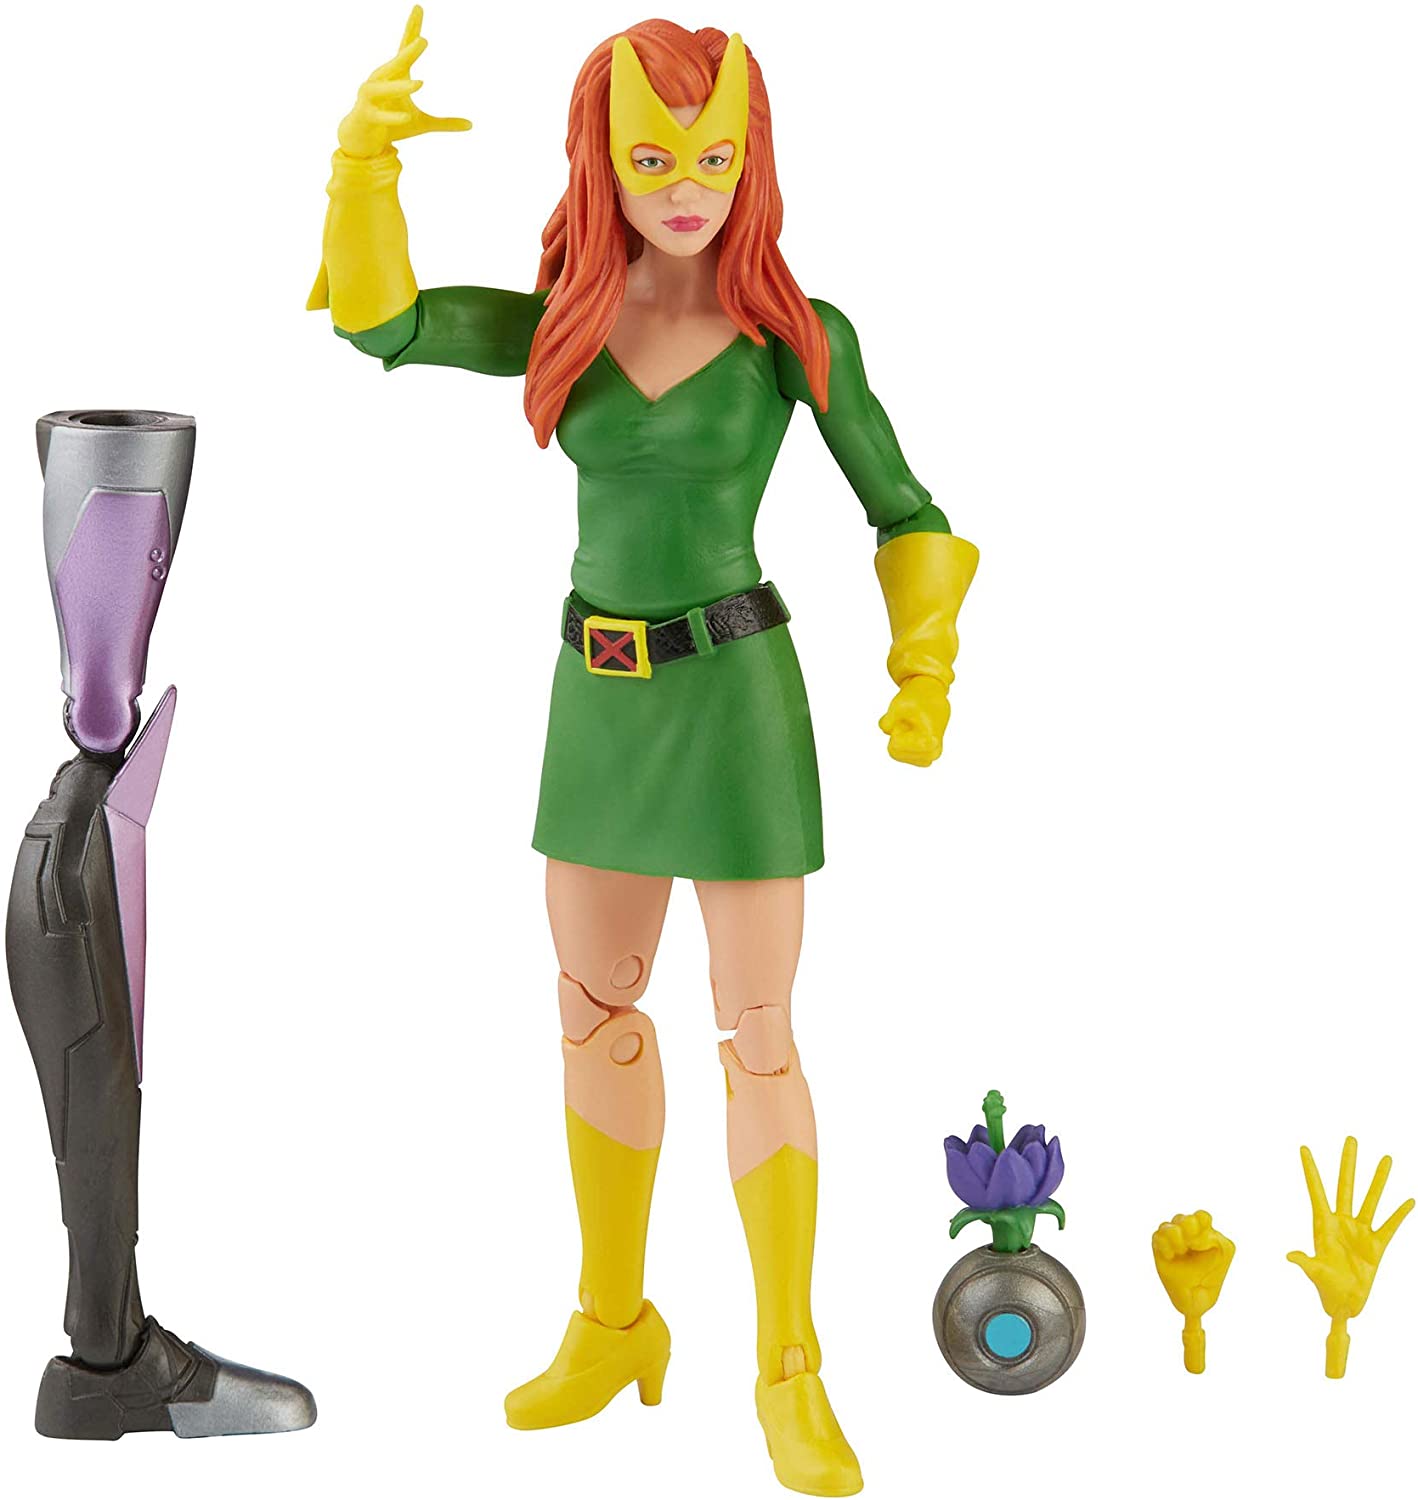 Hasbro Marvel Legends Series X-Men 6-inch Collectible Jean Grey Action Figure Toy, Premium Design and 3 Accessories